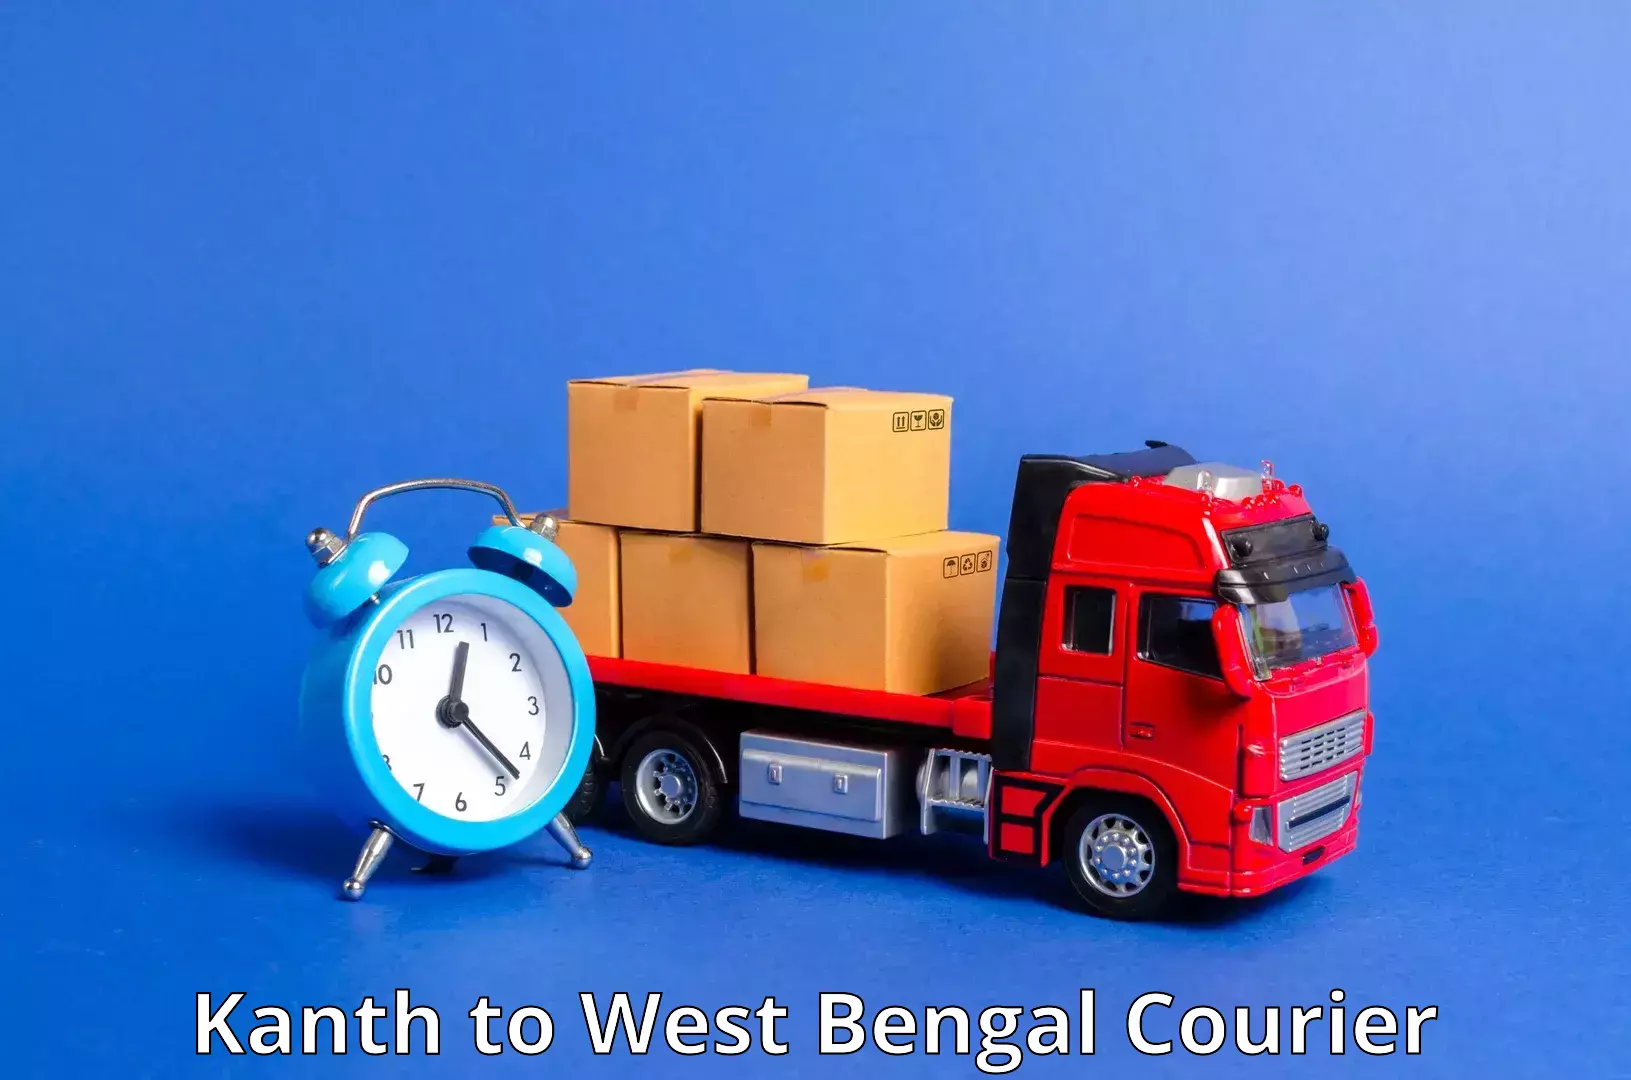 Flexible delivery scheduling Kanth to West Bengal